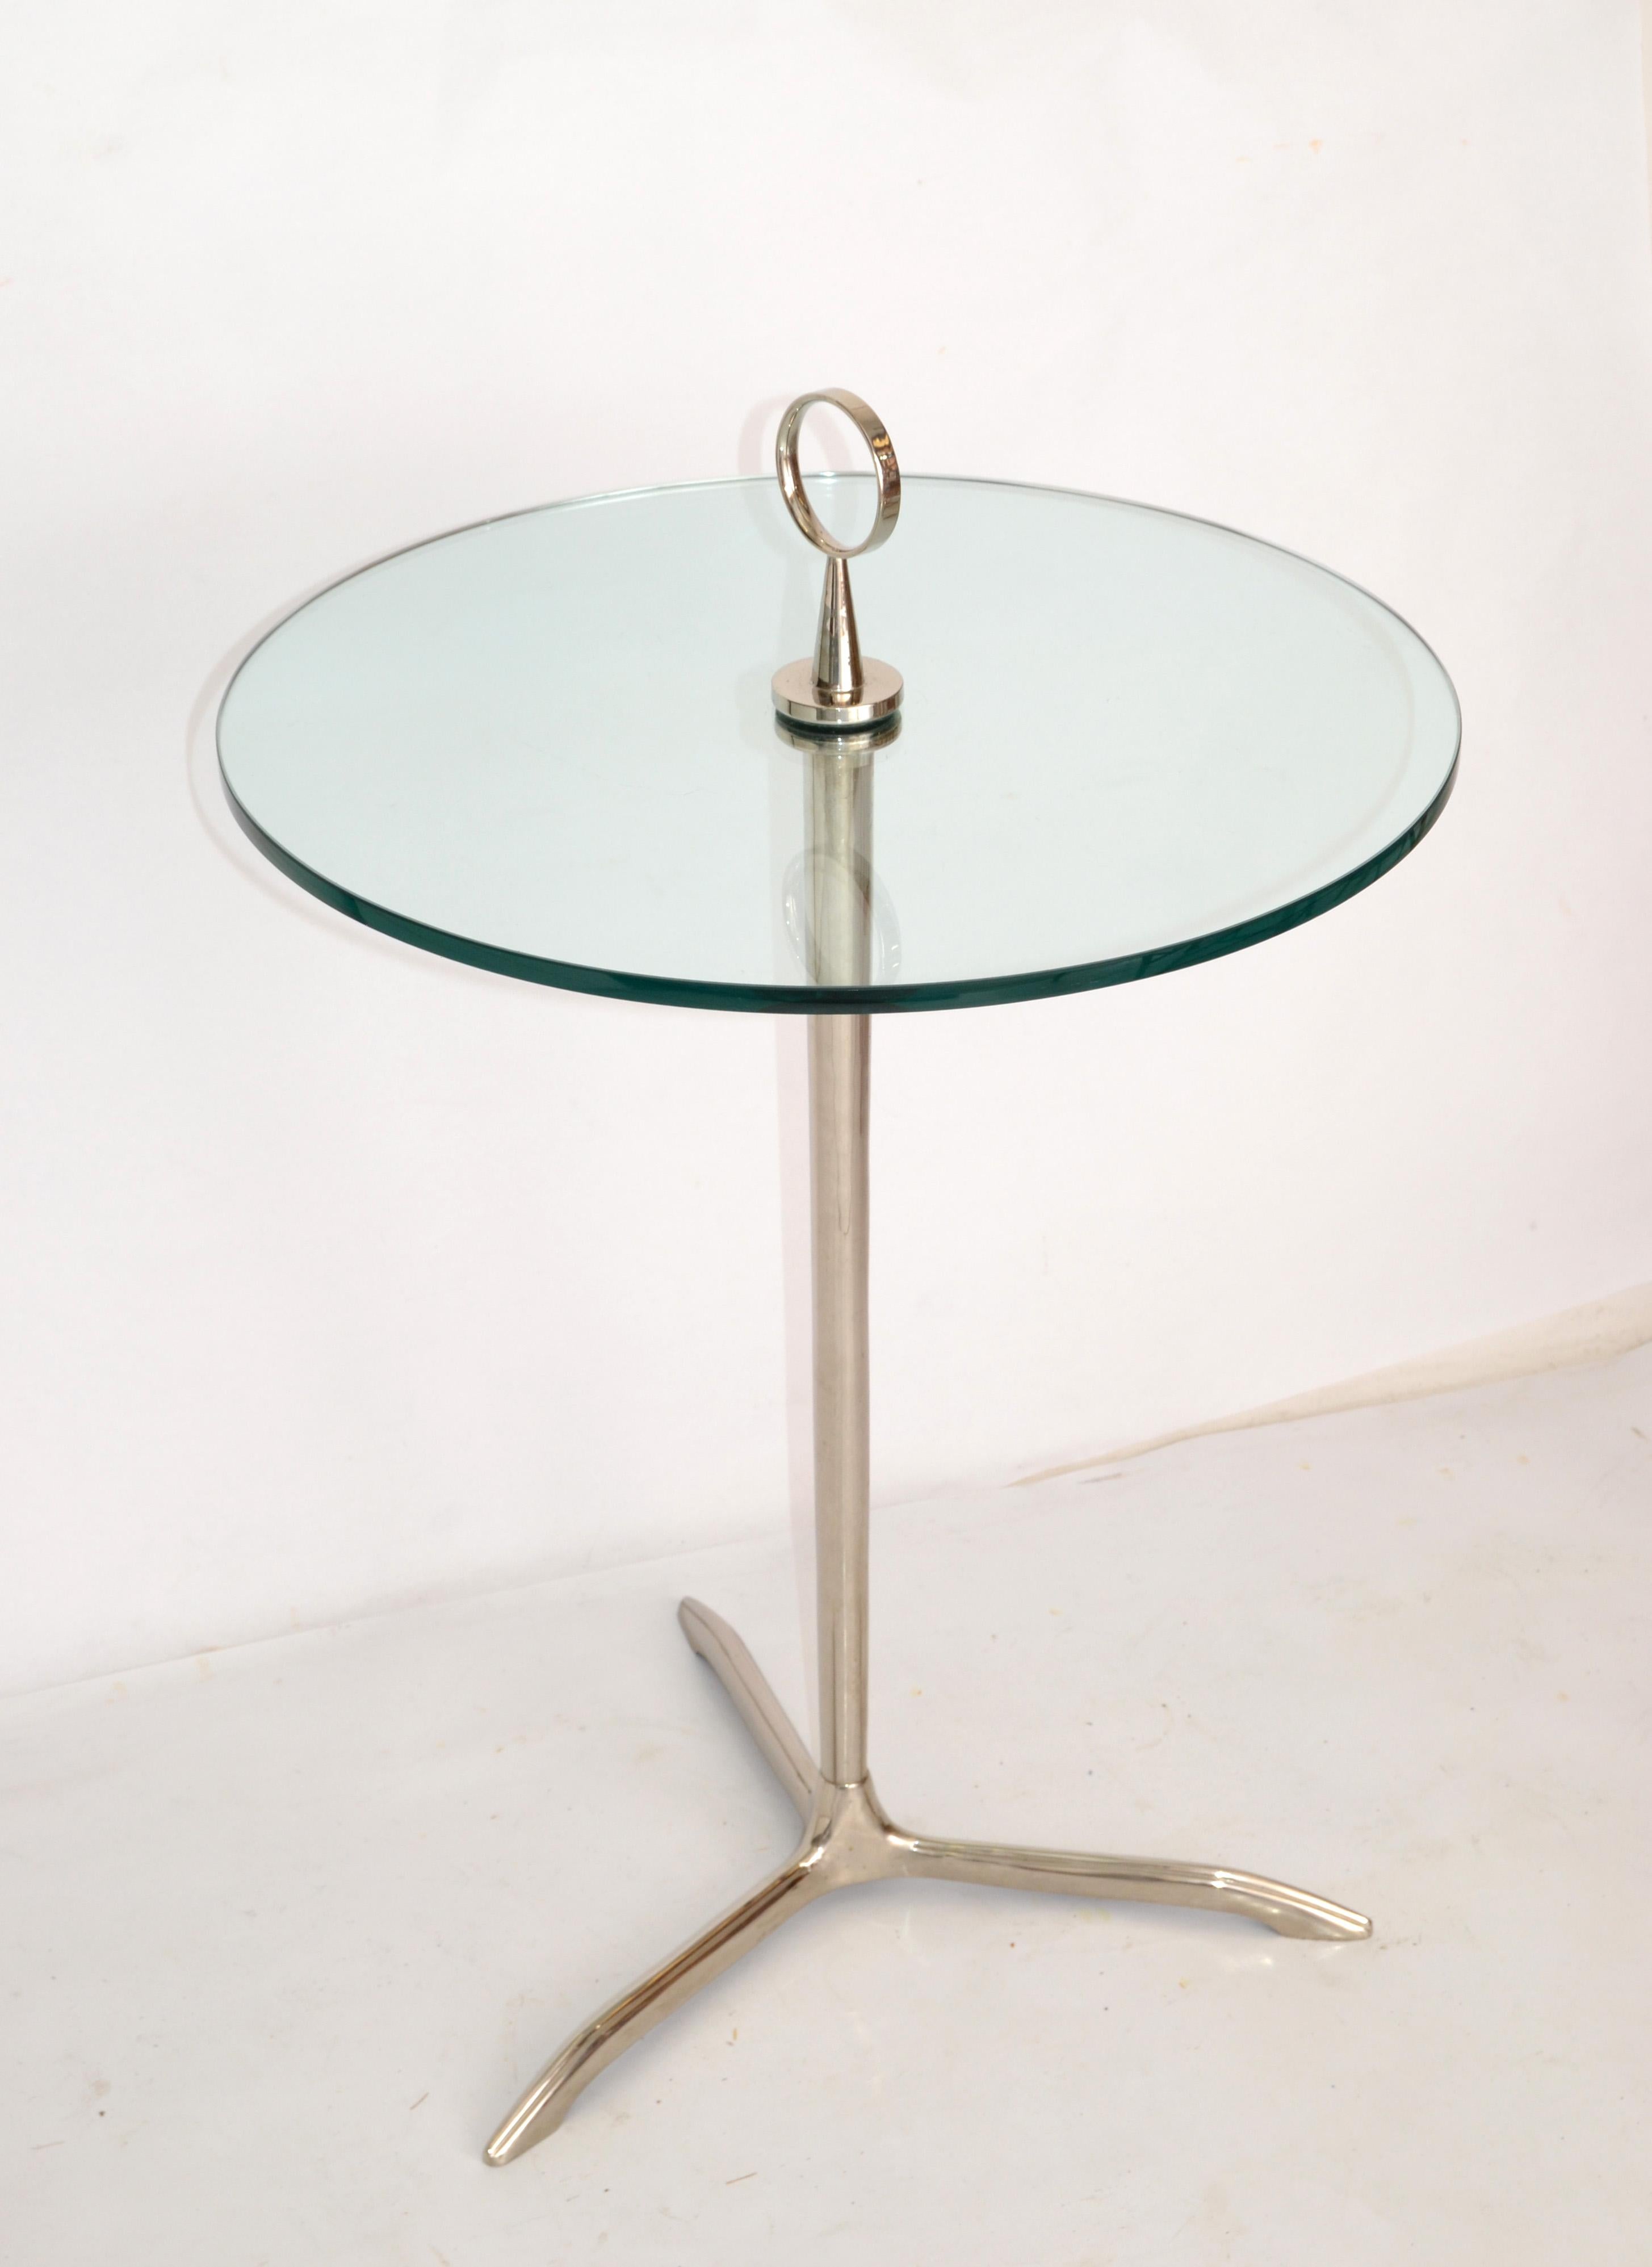 Minimalist and elegant Mid-Century Modern side, end or drink table attributed to Cesare Lacca and designed in Italy in the 1950s.
It is made of stainless-steel has a polished finish and comes with a green tinted round glass mounted on a tripod